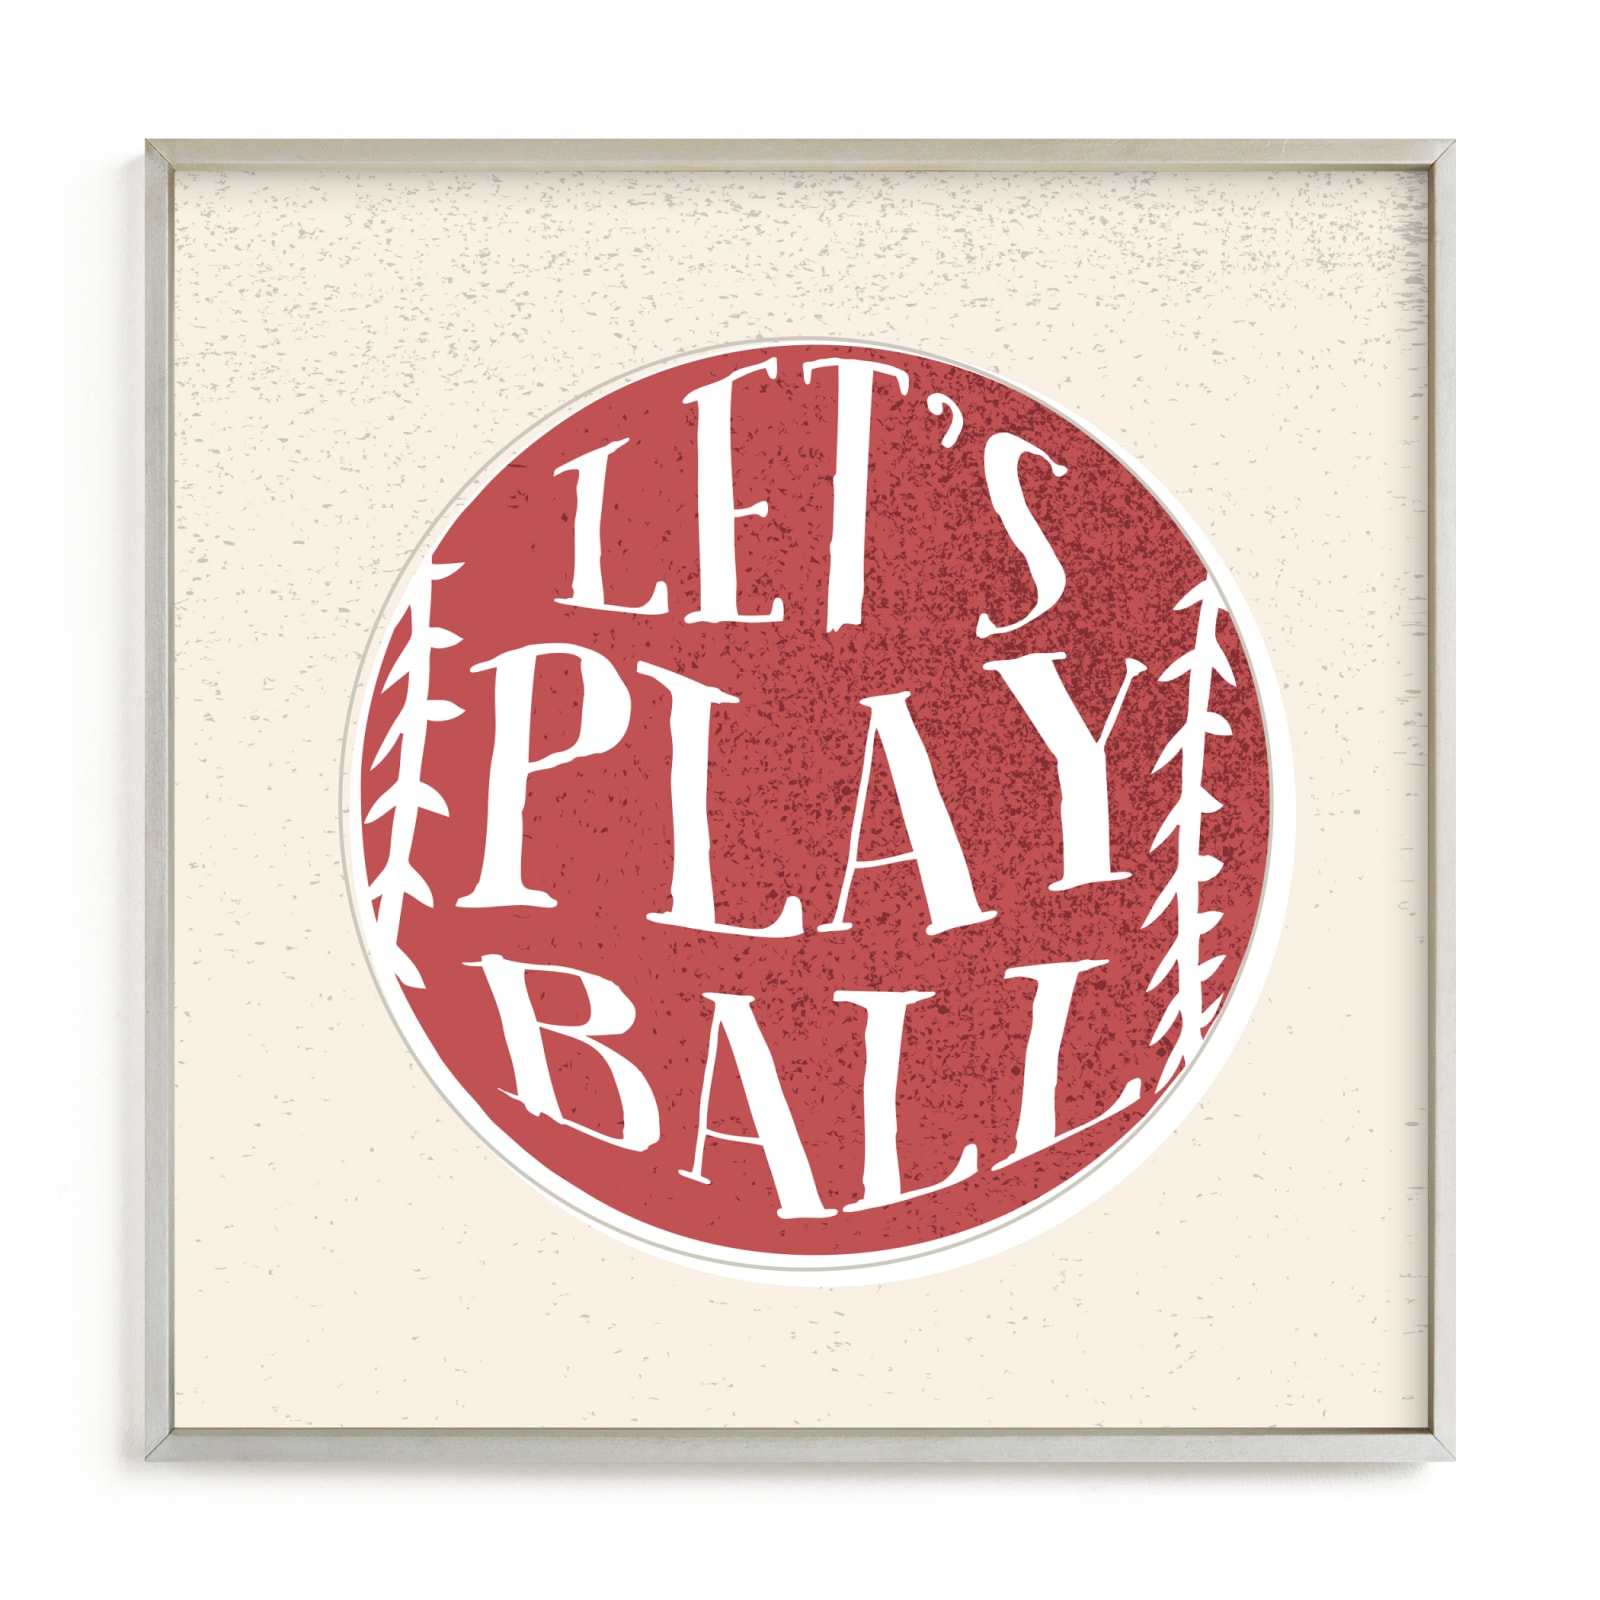 "Let's Play Ball!" - Grownup Open Edition Non-custom Art Print by Oma N. Ramkhelawan in beautiful frame options and a variety of sizes.